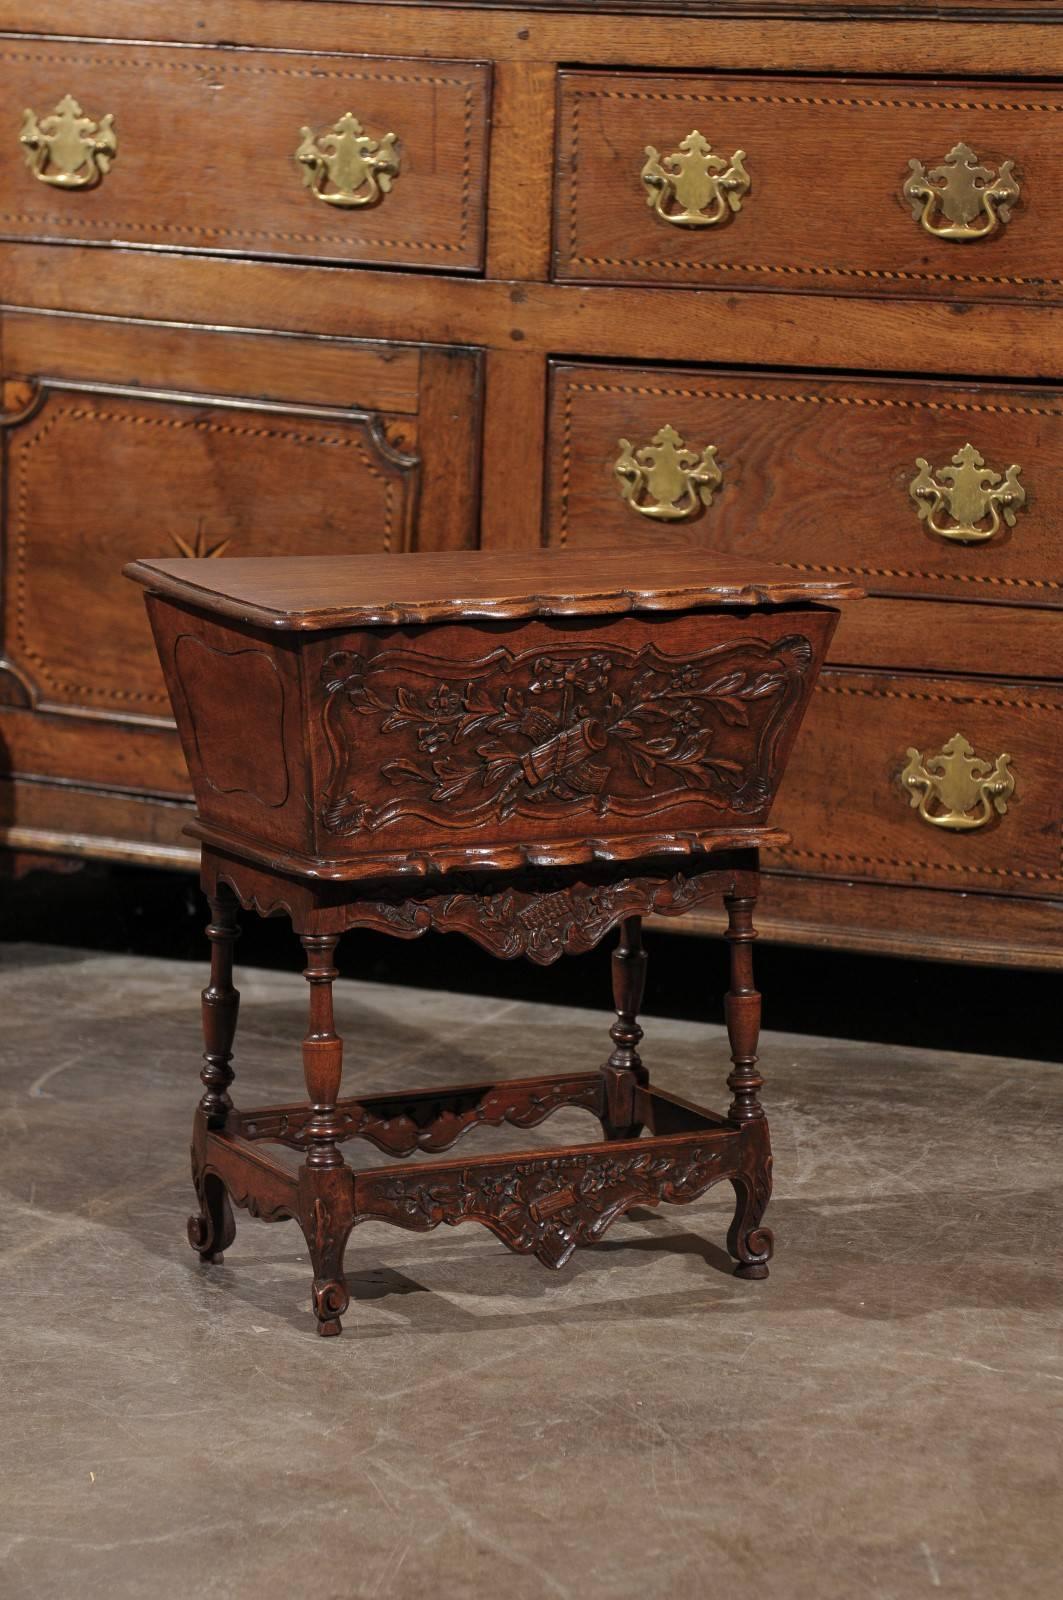 A French Louis XV style pétrin (dough bin) table from the early 20th century. This French petite wooden carved dough bin table from the 1900s-1920s features a rectangular hinged top with scalloped front opening to reveal the inner section where